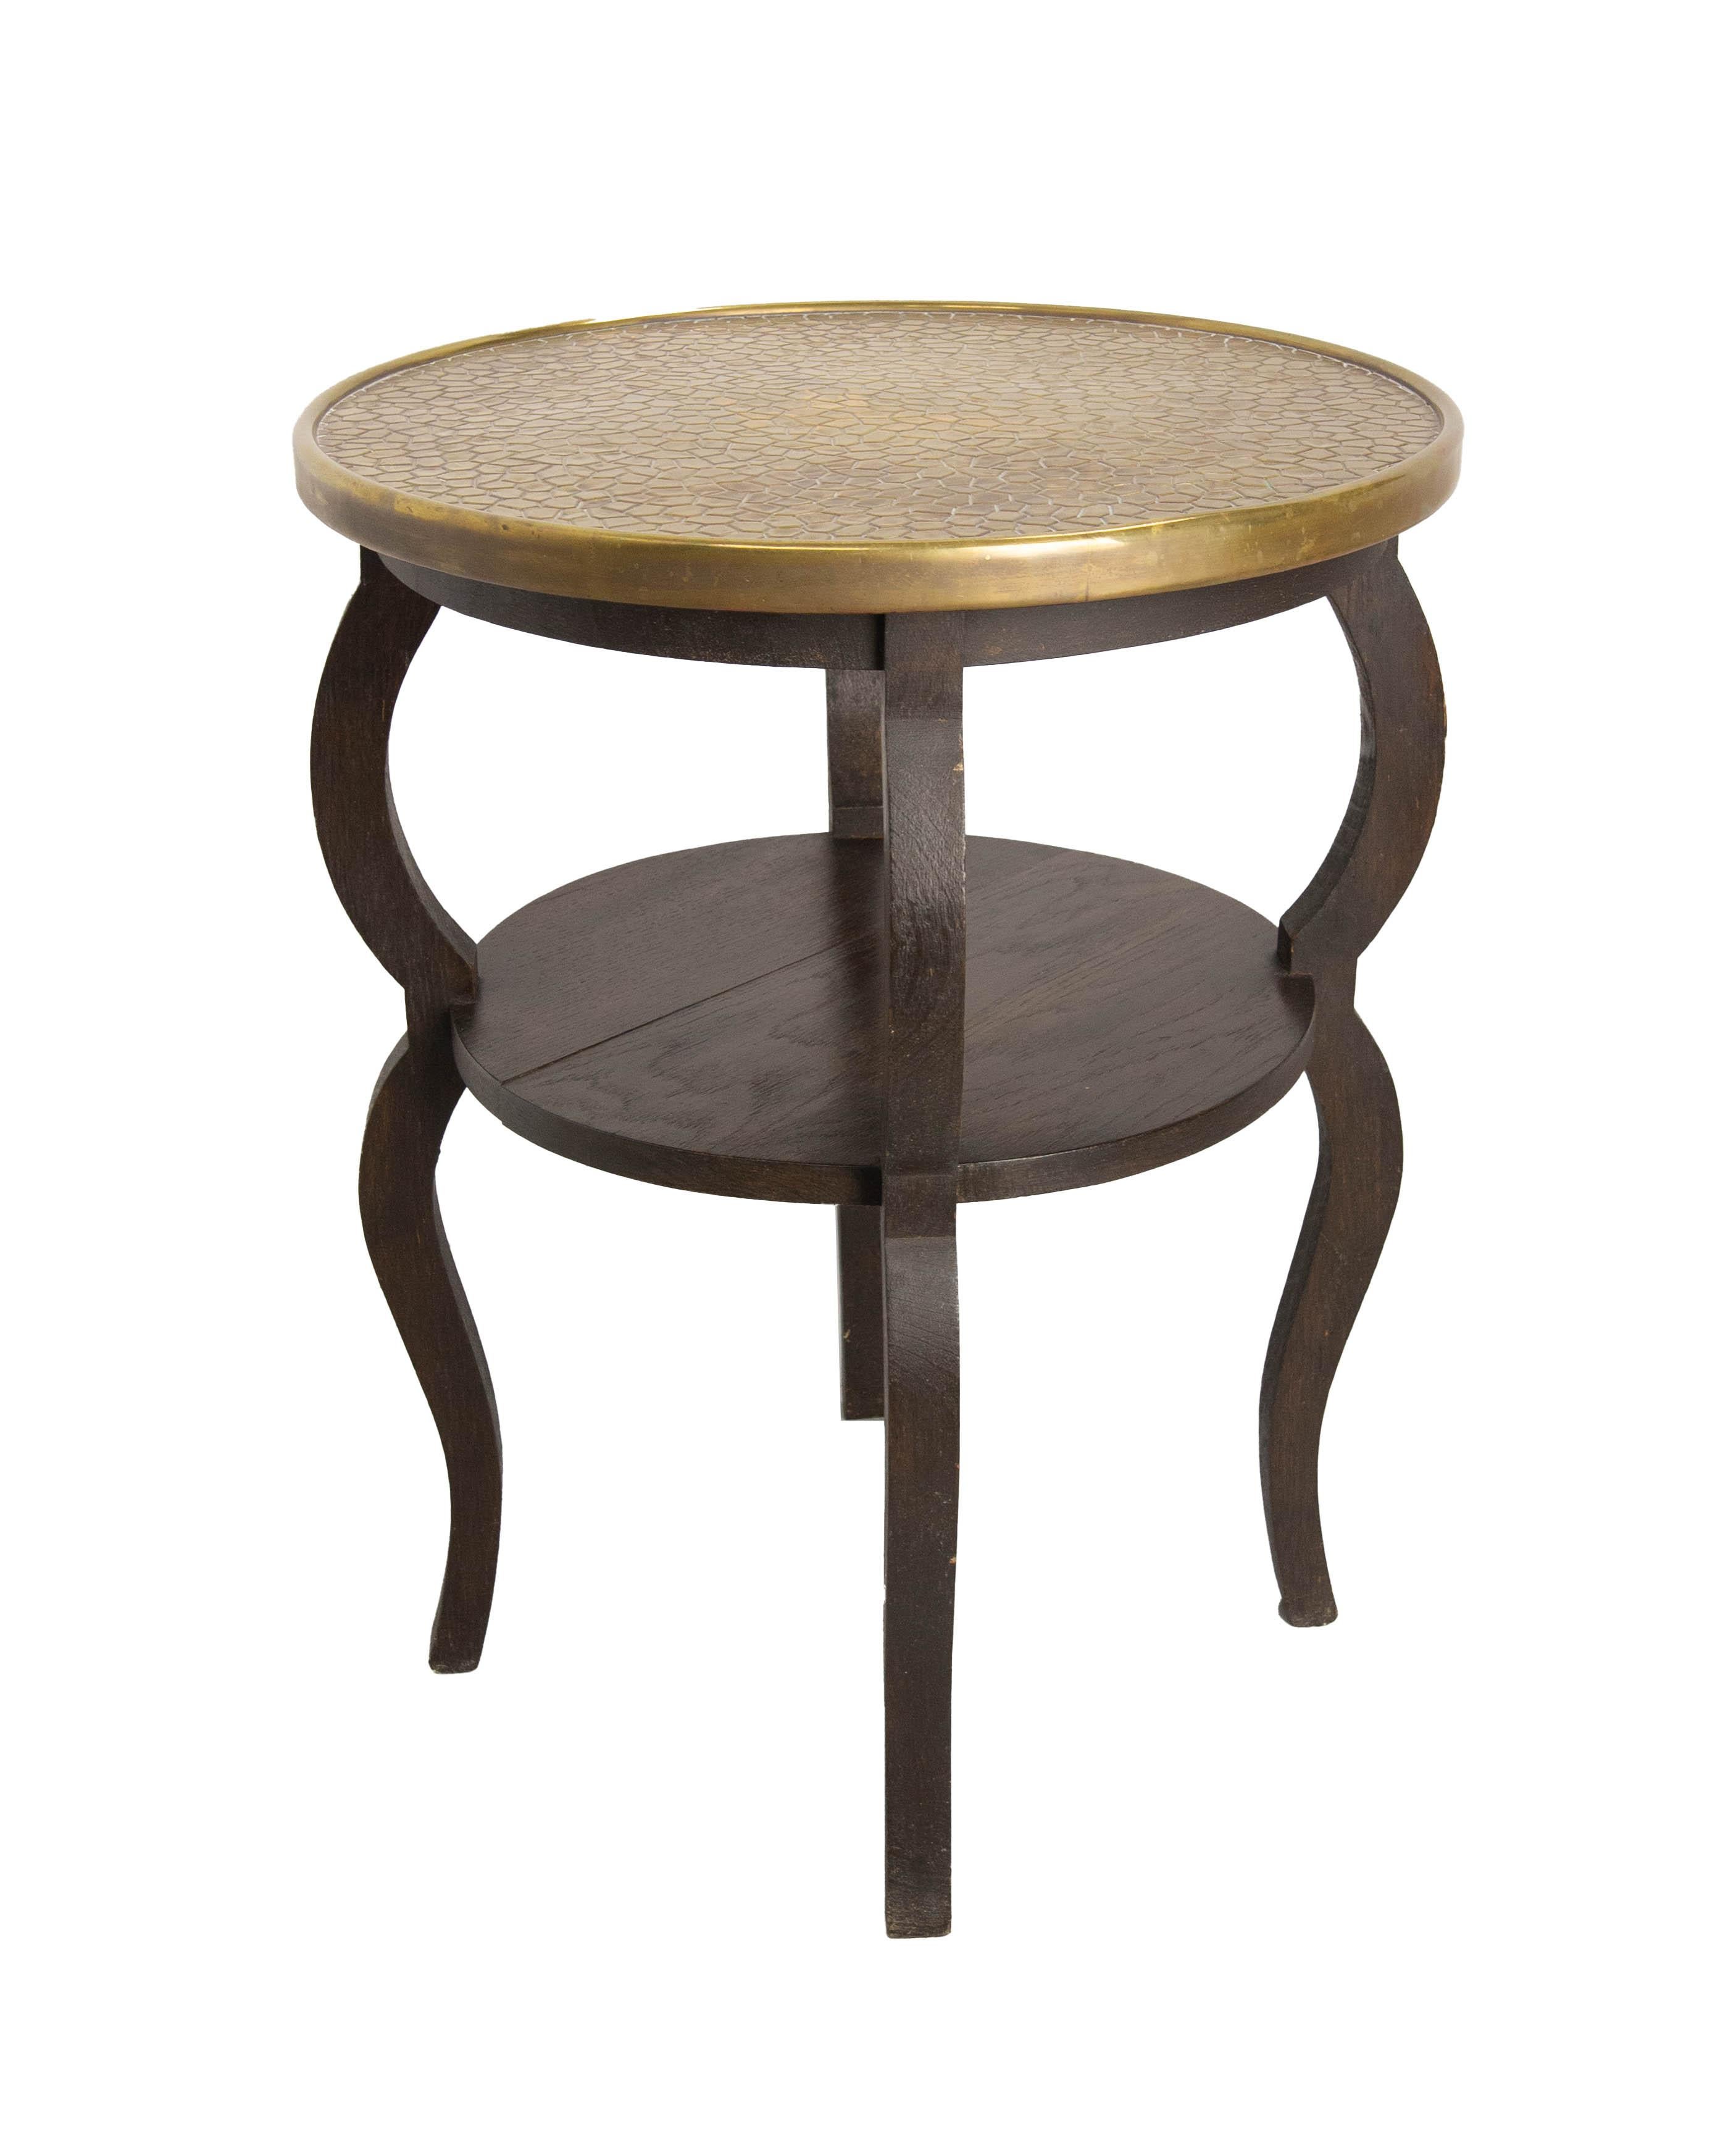 French Chestnut & Copper Table Sellette Side Table or Coffee Table, circa 1940 In Good Condition For Sale In Labrit, Landes